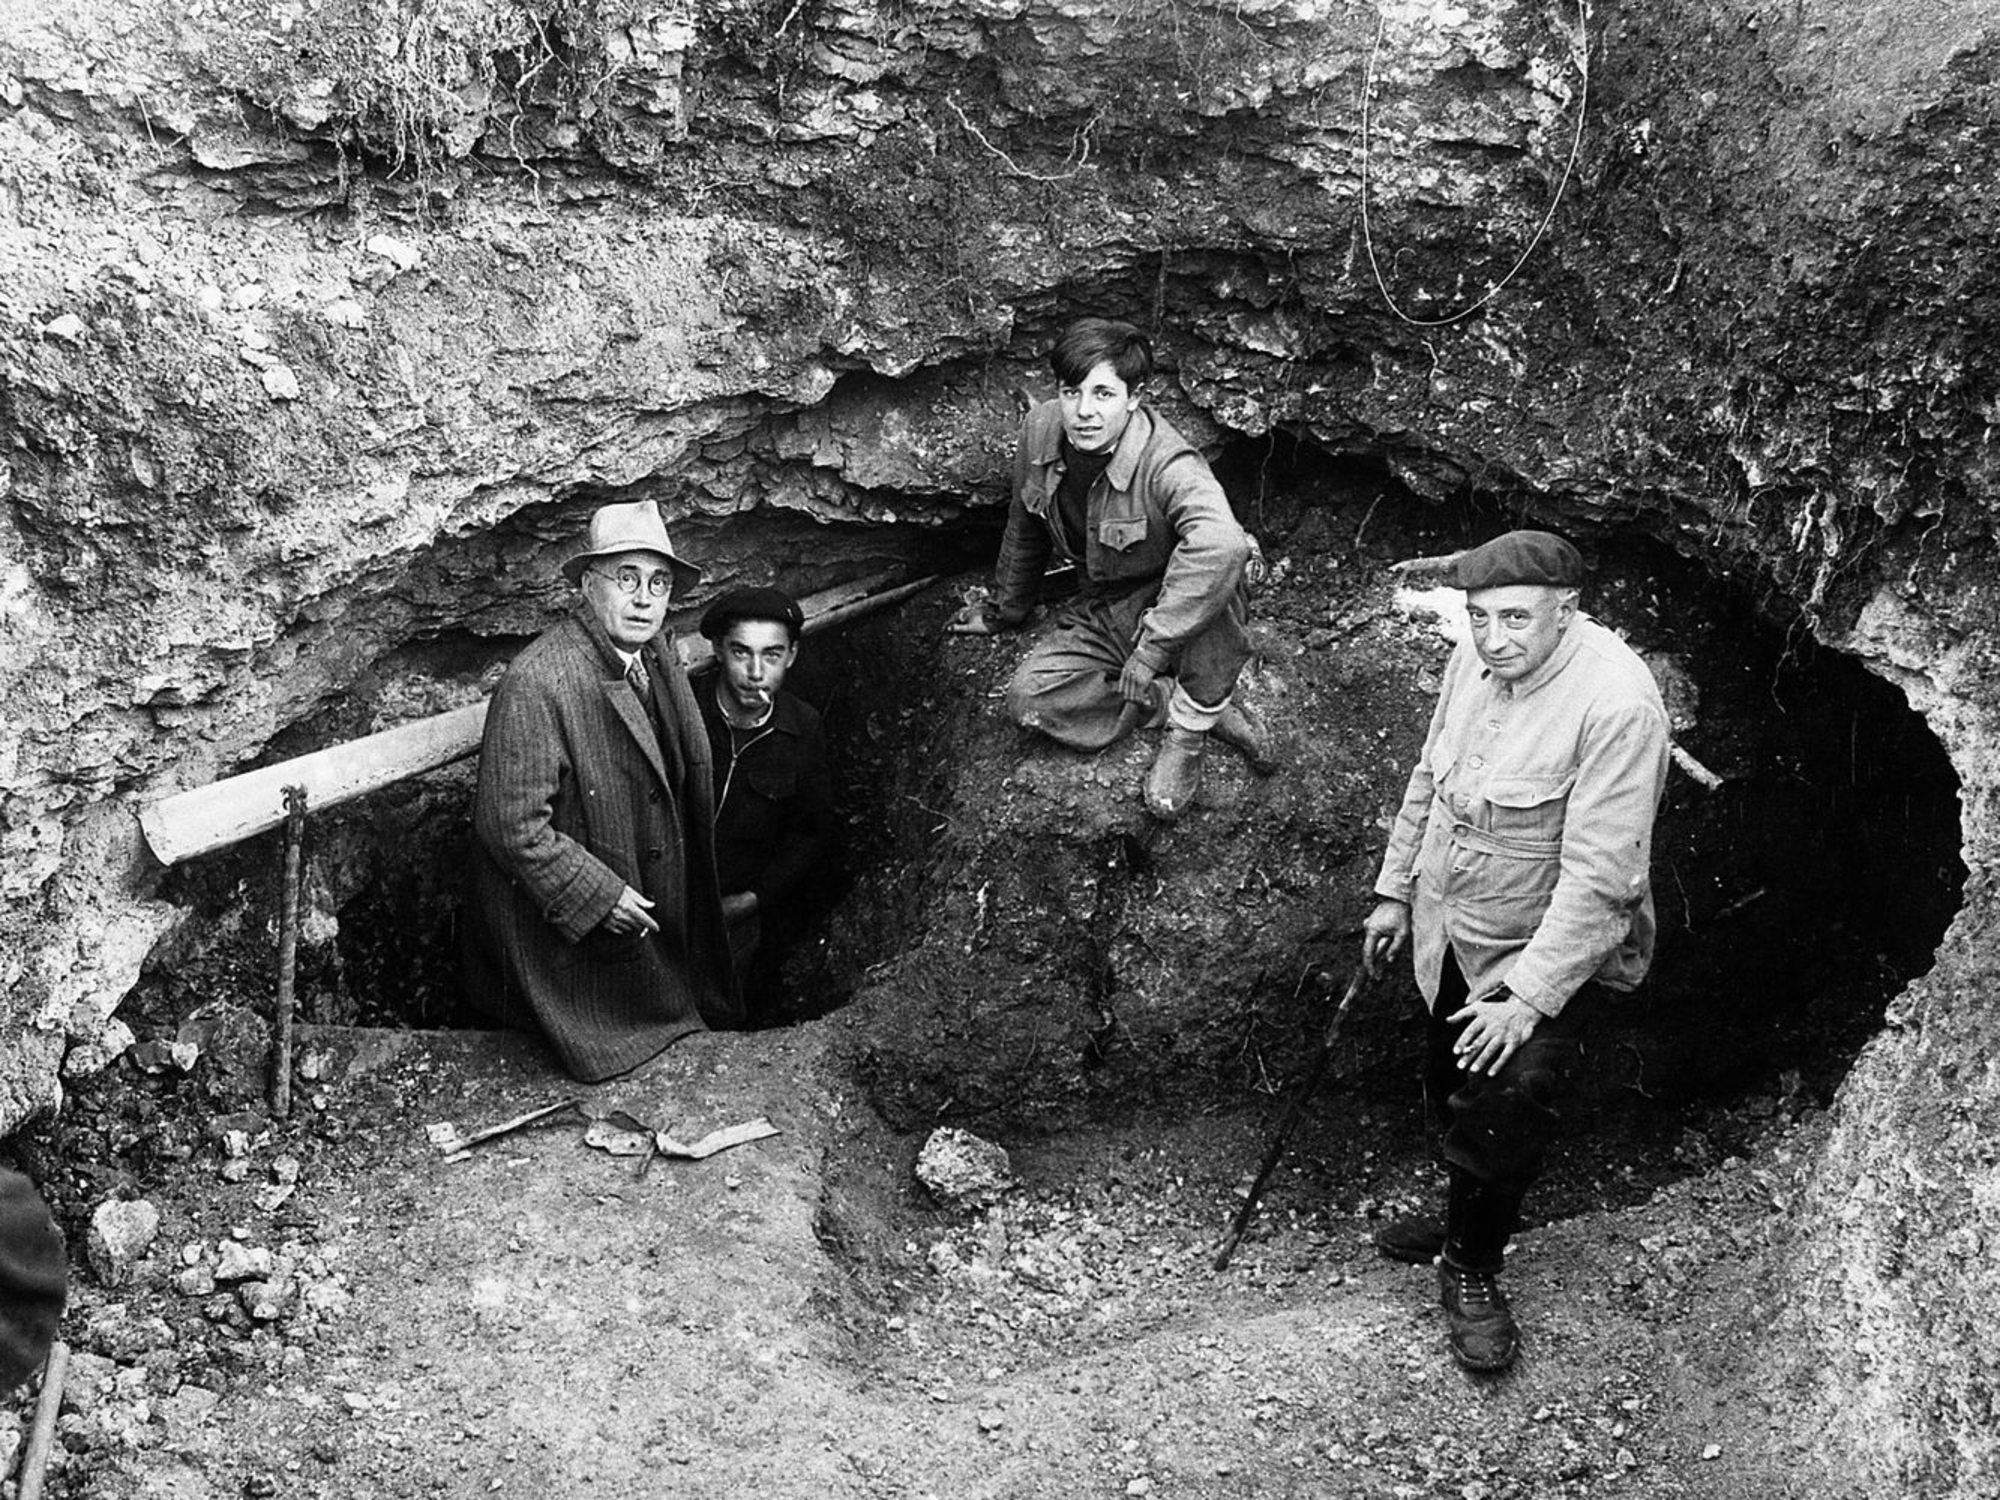 Entry to Lascaux Cave in 1940 with Léon Laval, Marcel Ravidat, Jacques Marsal and Henri Breuil © D.R.